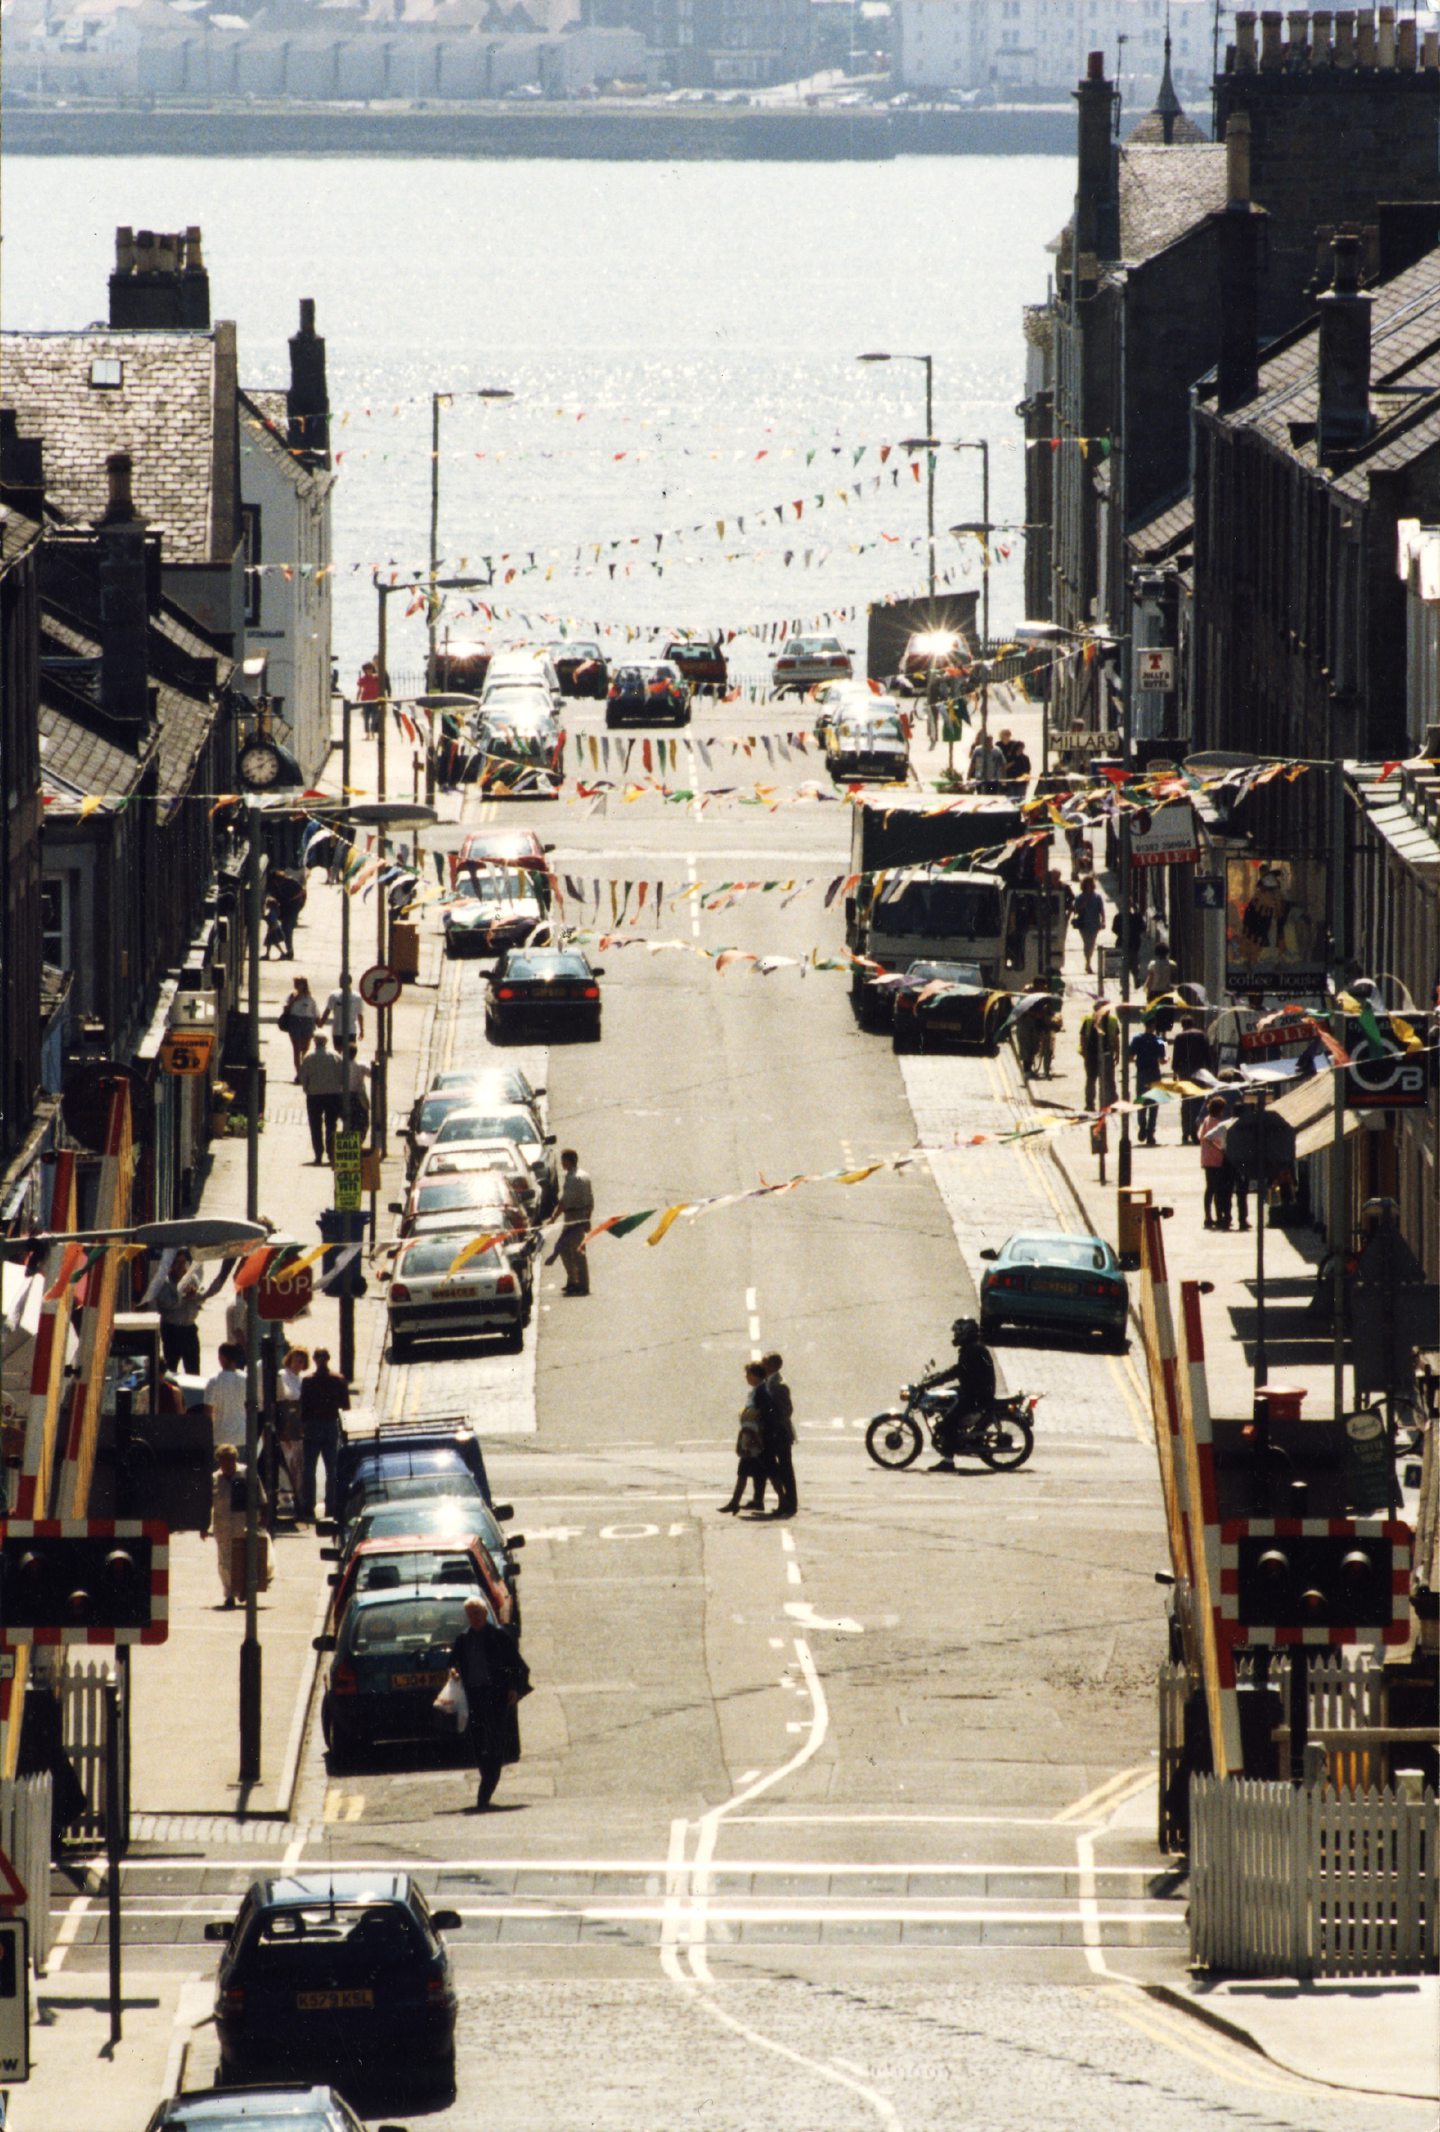 An aerial view looking down the street in June 1996, with bunting hanging from buildings and the River Tay in the background